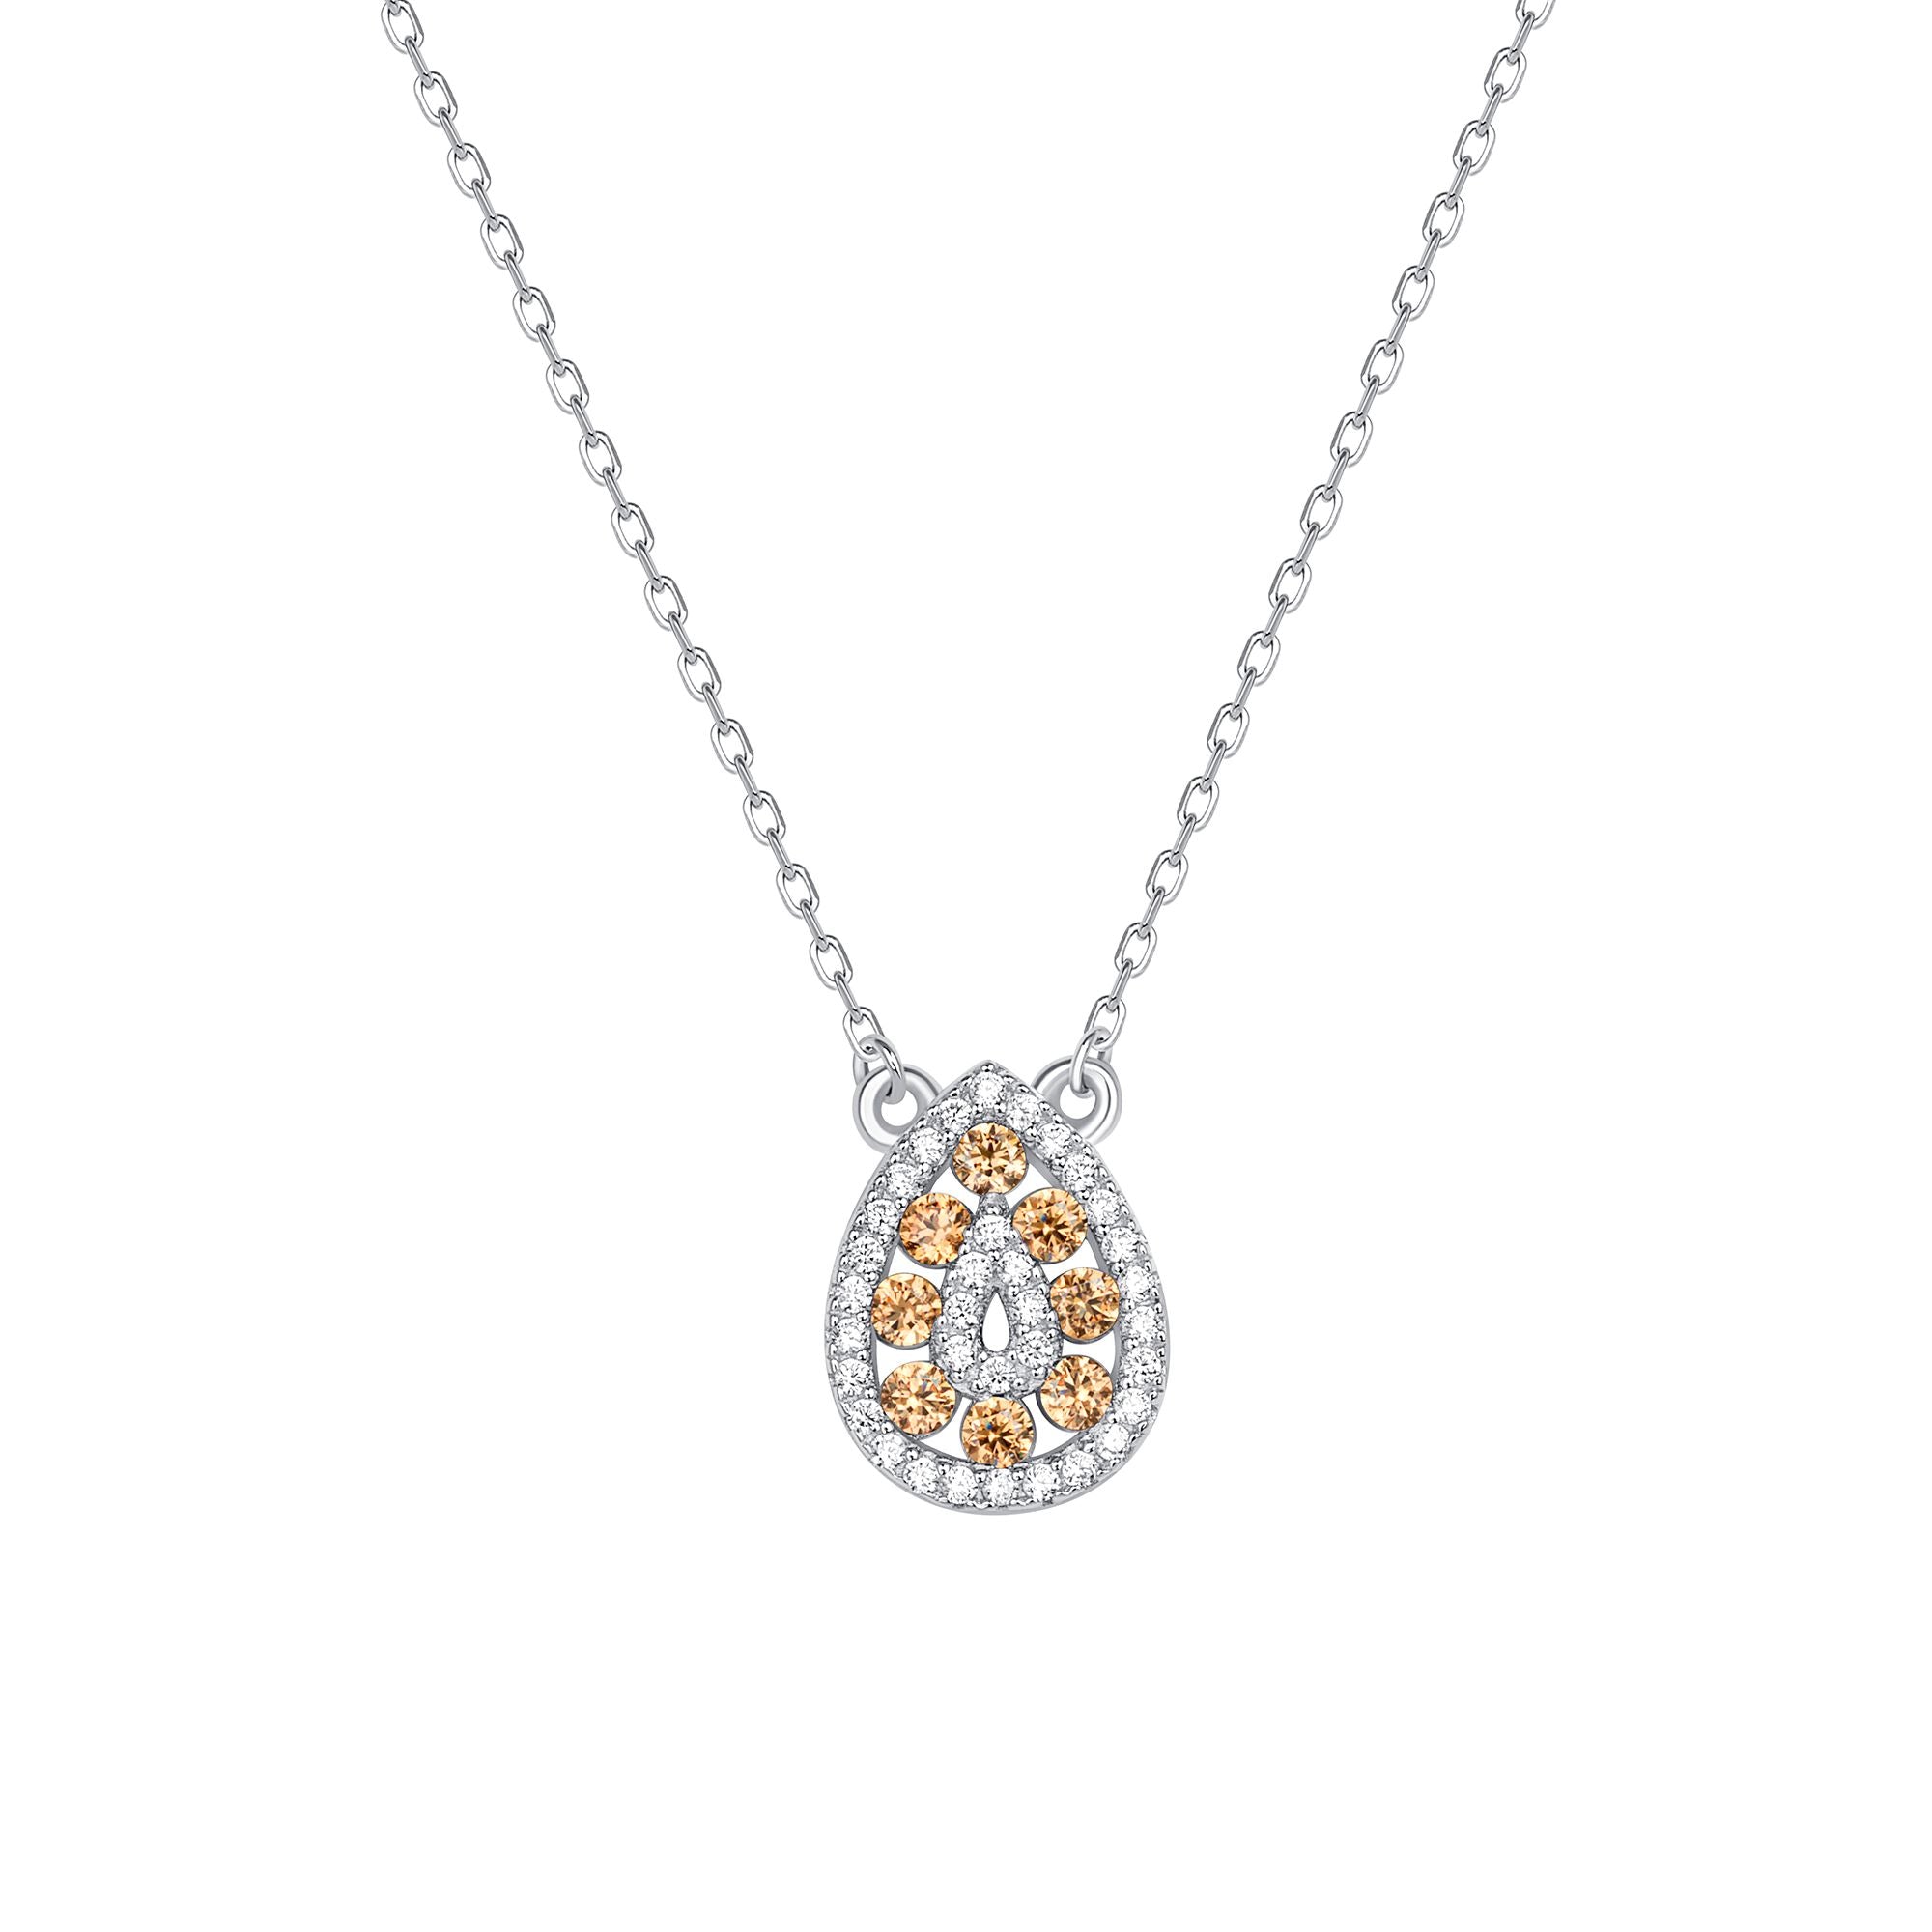 925 Sterling Silver Round Cut Gold &amp; White CZ Alternating Rows Teardrop Pendant &amp; Earrings Jewelry Set